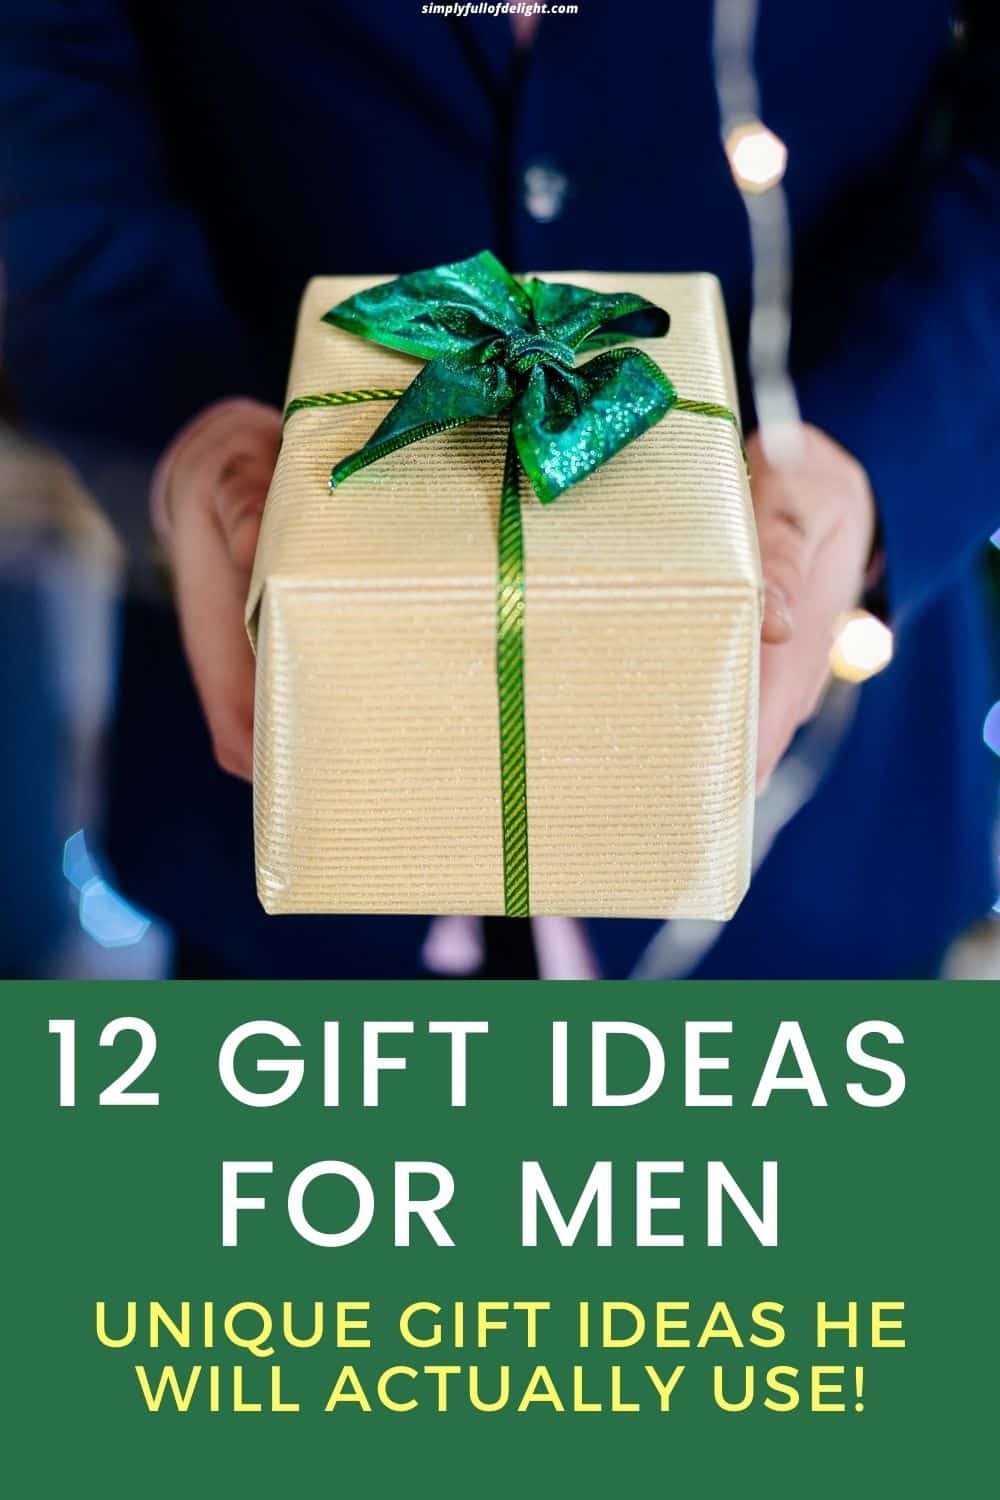 Gifts for Men - 12 Fantastic Gifts He will Love! - Simply Full of Delight